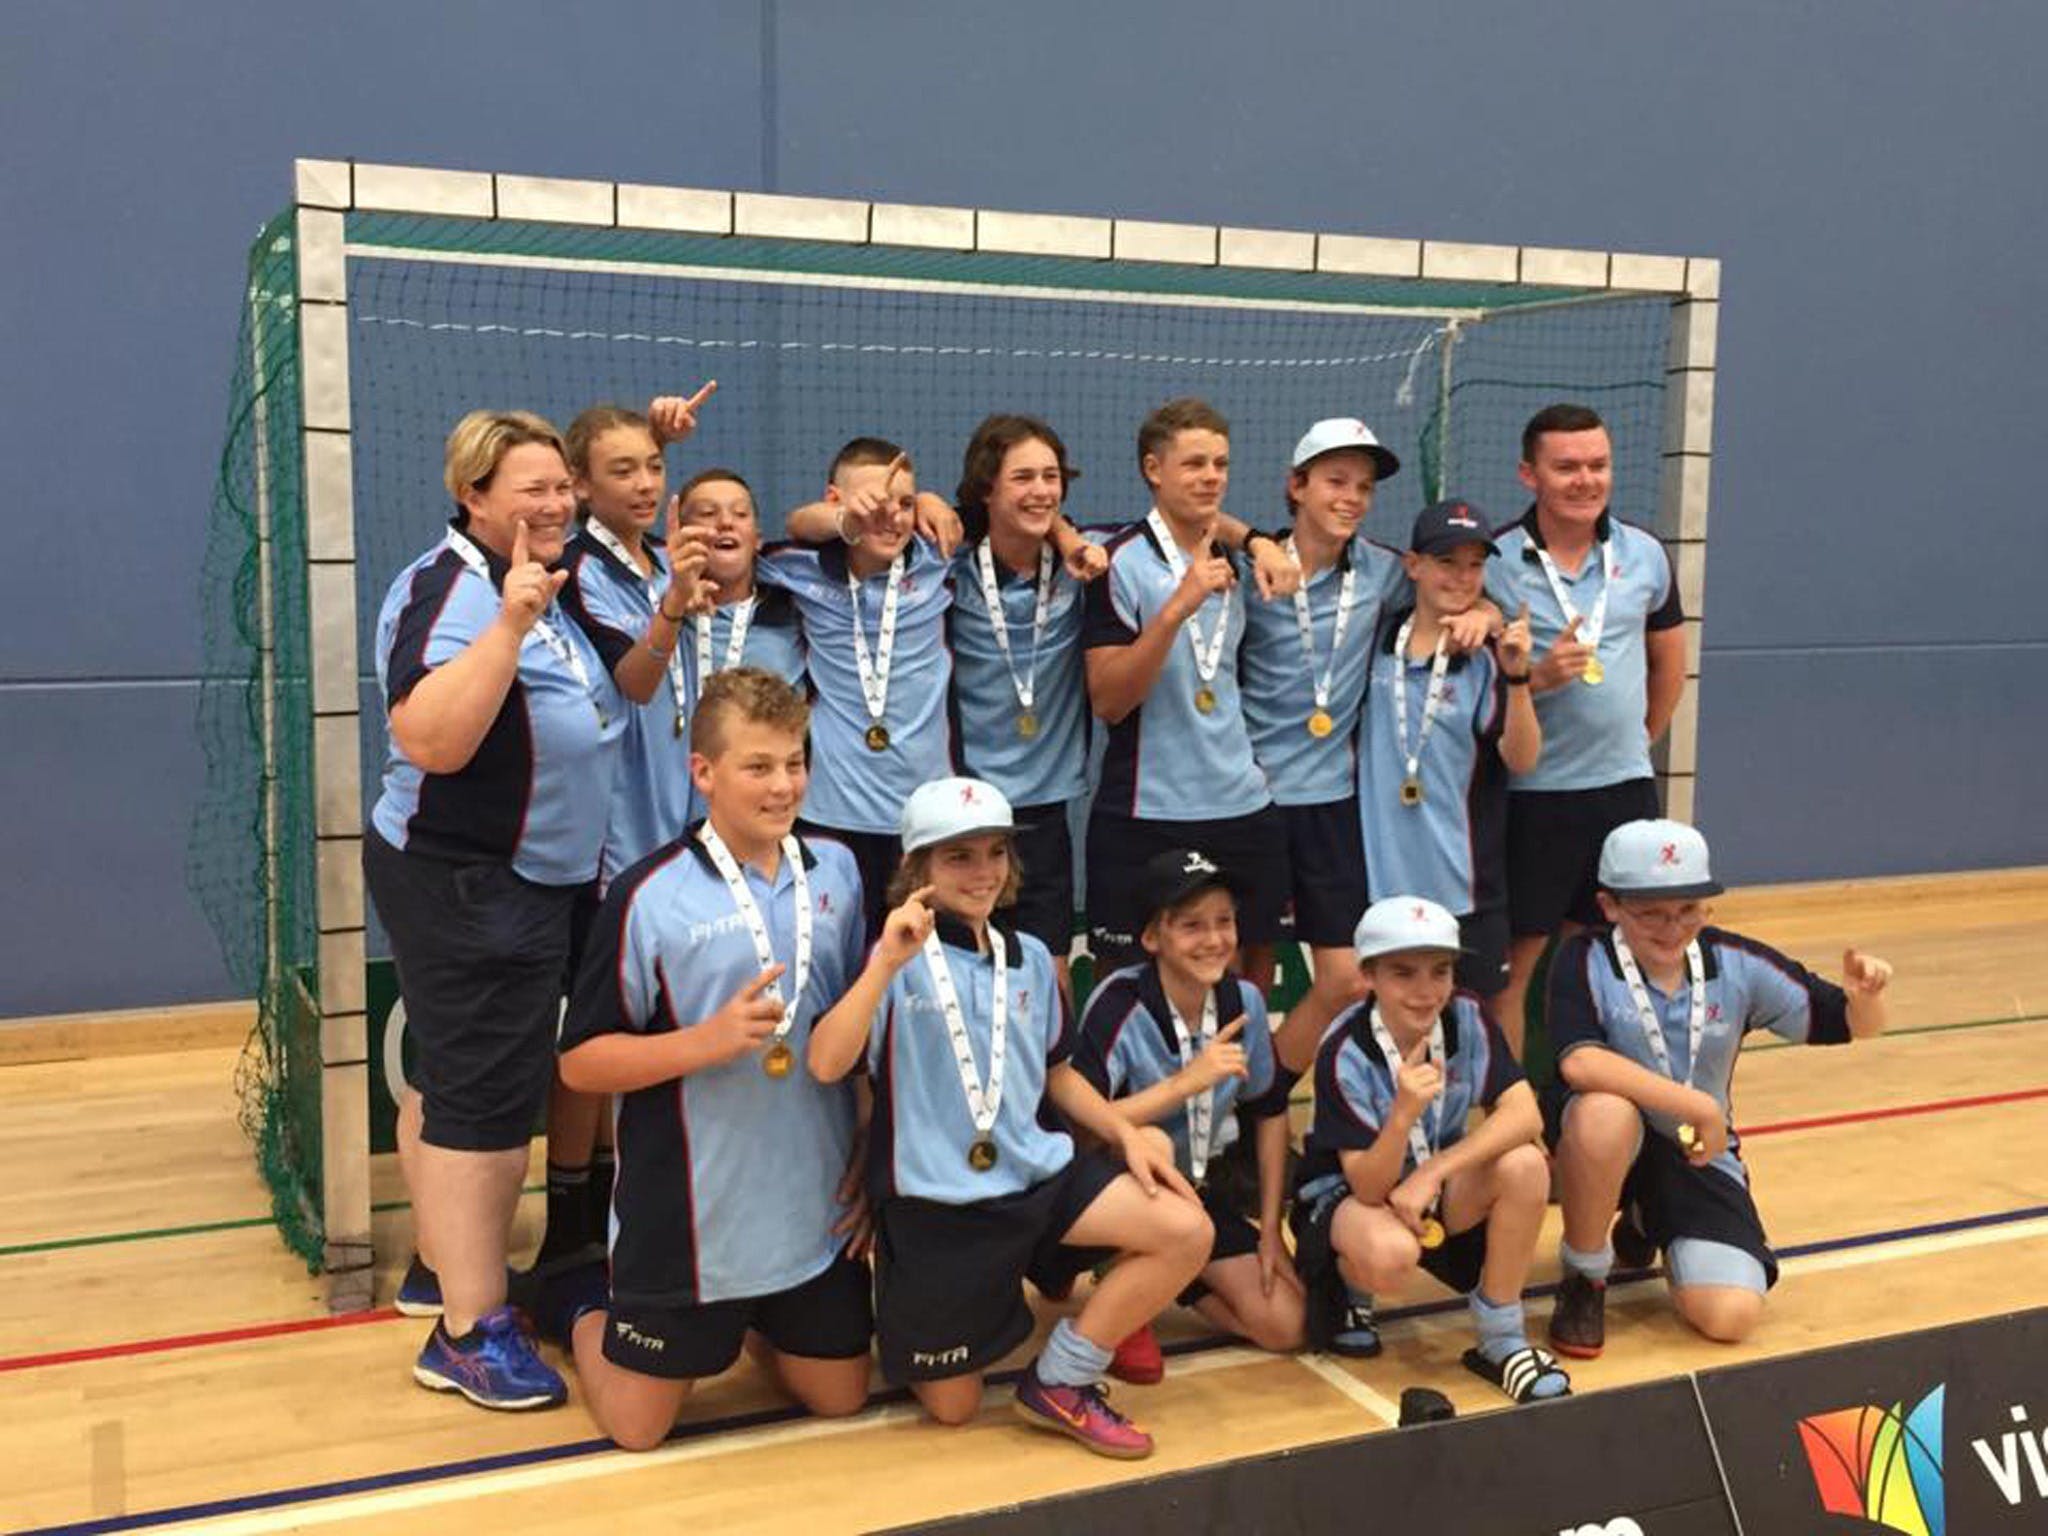 Hockey NSW Indoor State Championship  Under 18 Boys - Great Ocean Road Tourism